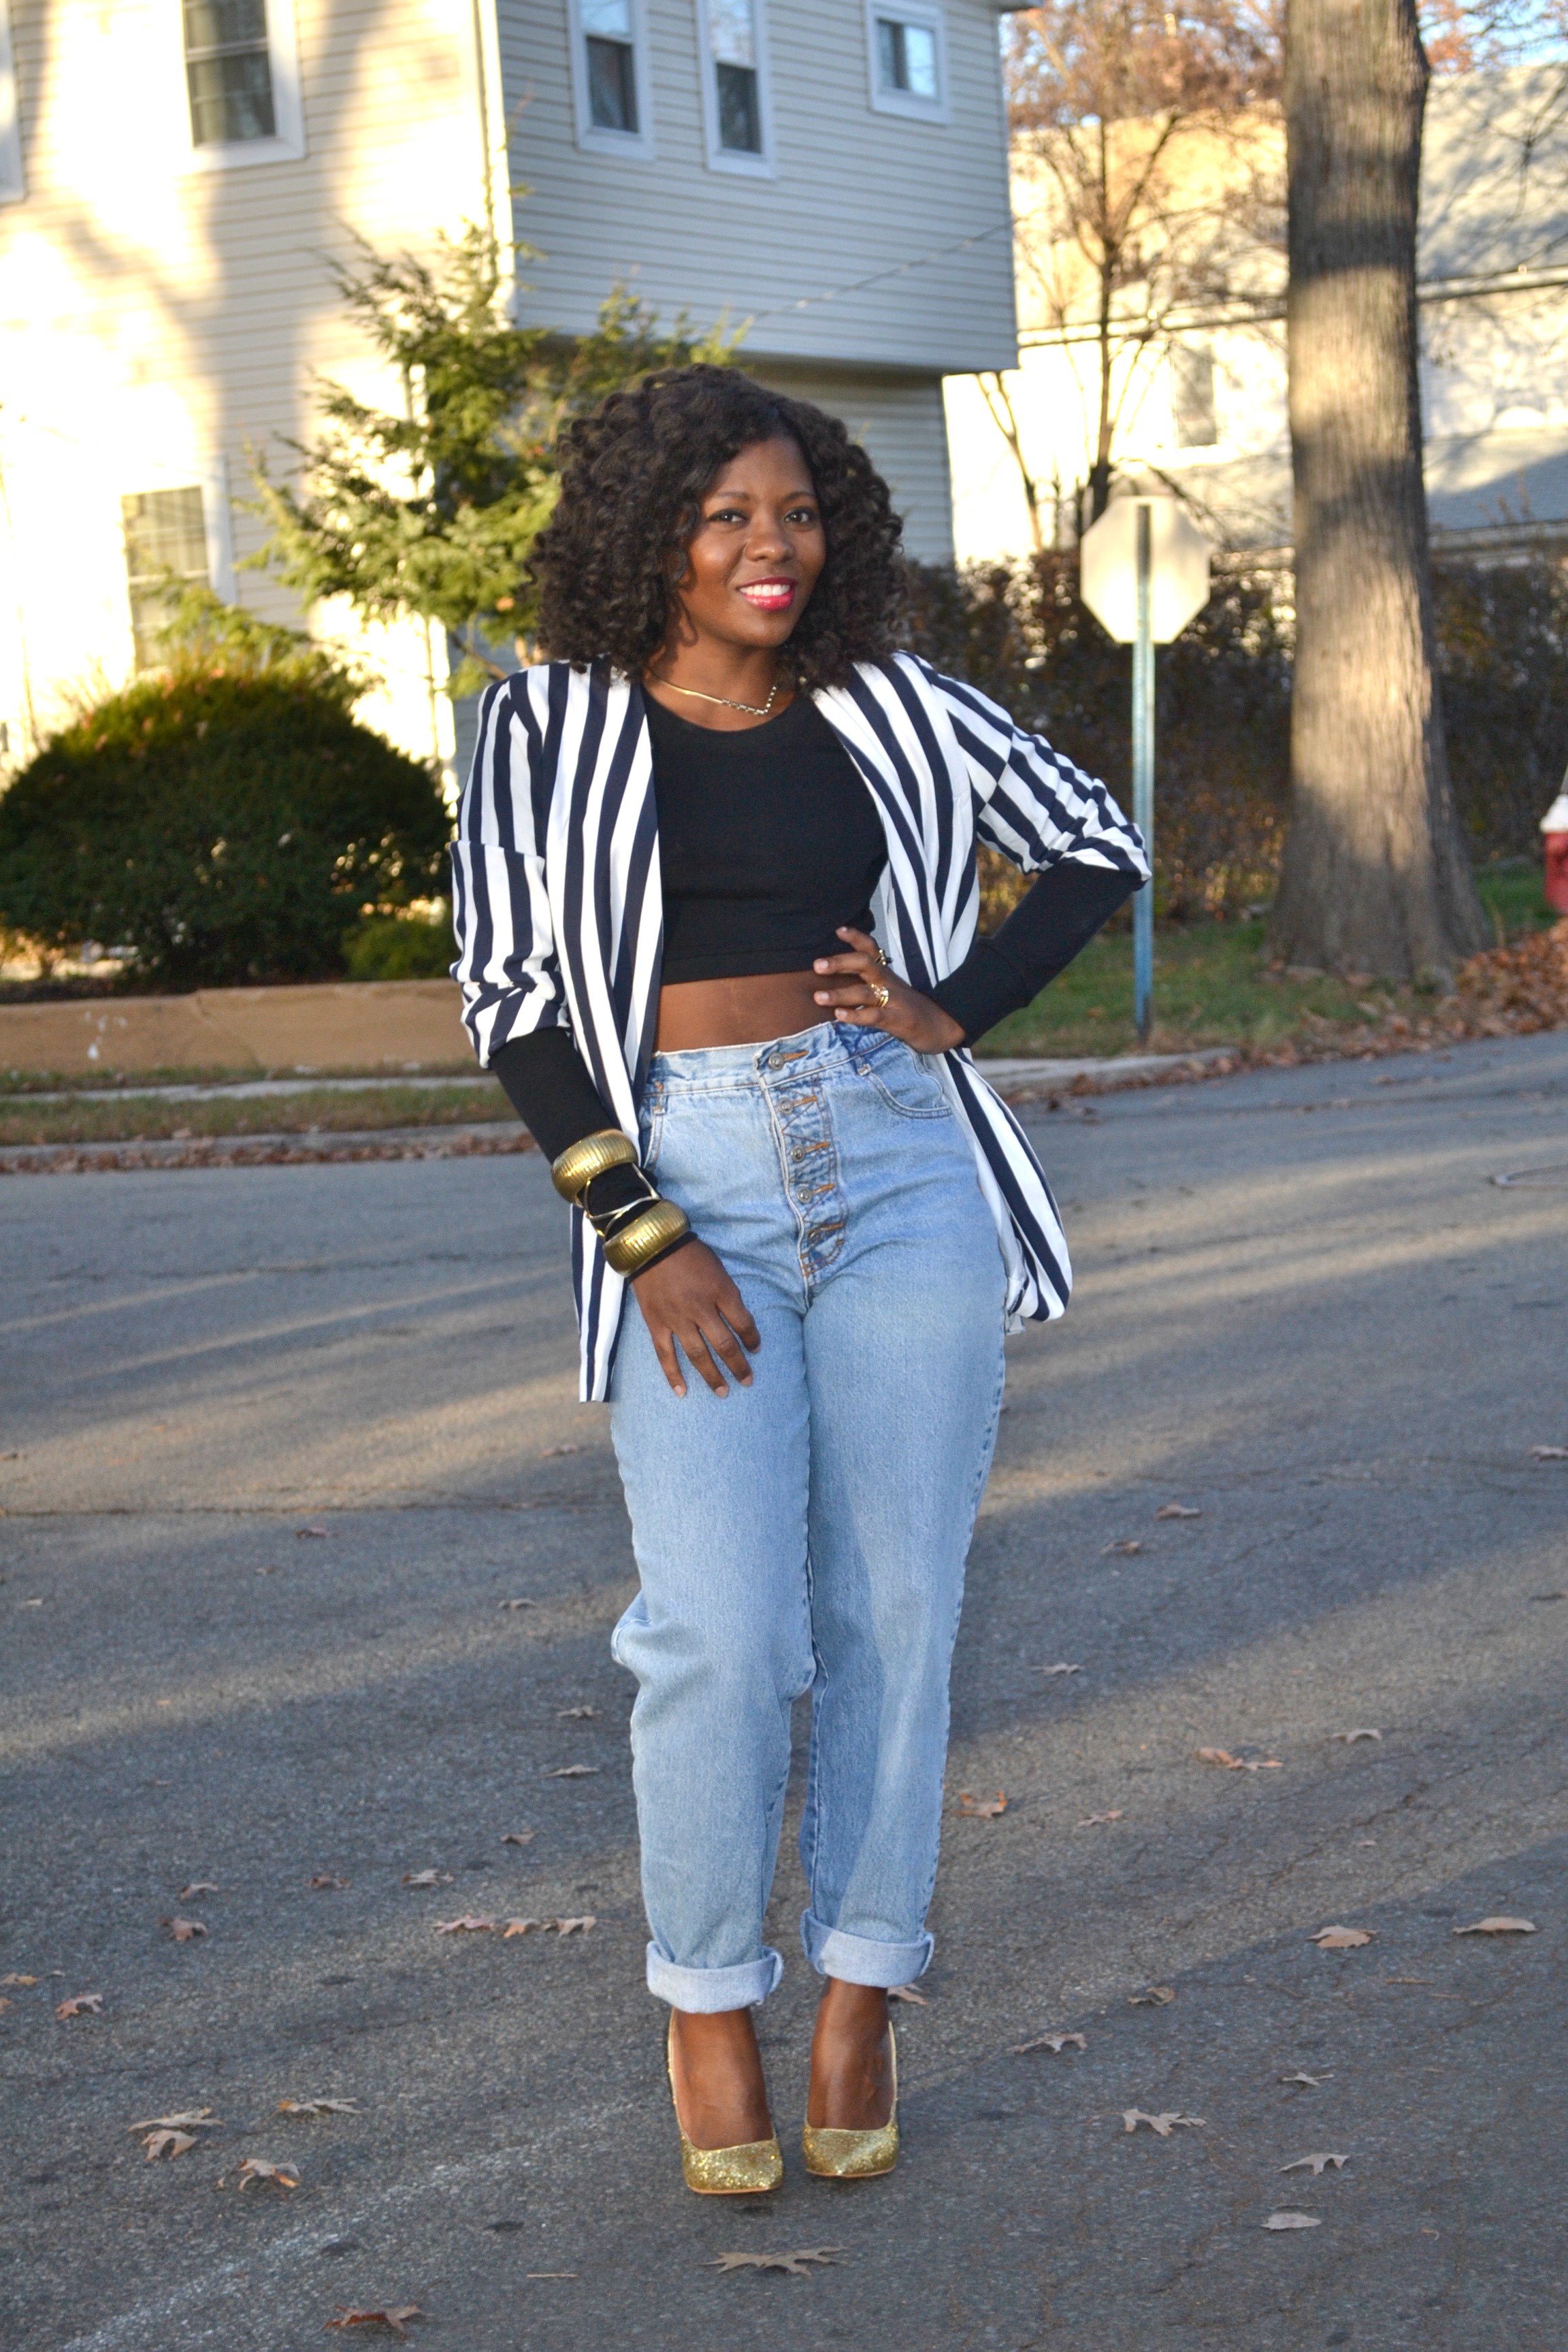 Fall Outfits: Chunky Knit Sweater and Boyfriend Jeans | Jess Ann Kirby